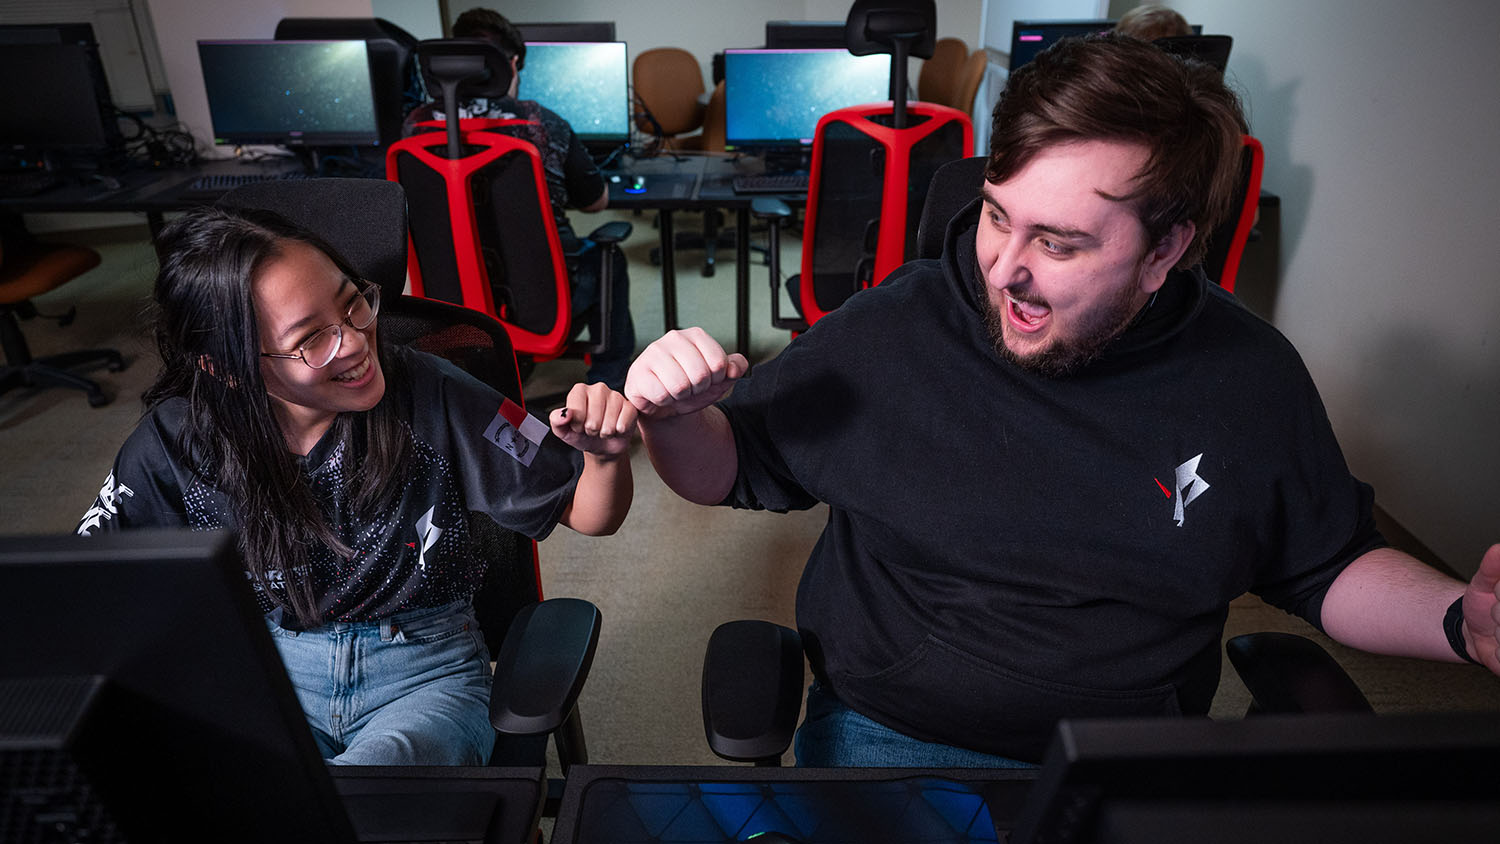 Two members of the Esports Club celebrate victory with a fist bump in an on-campus gaming space.